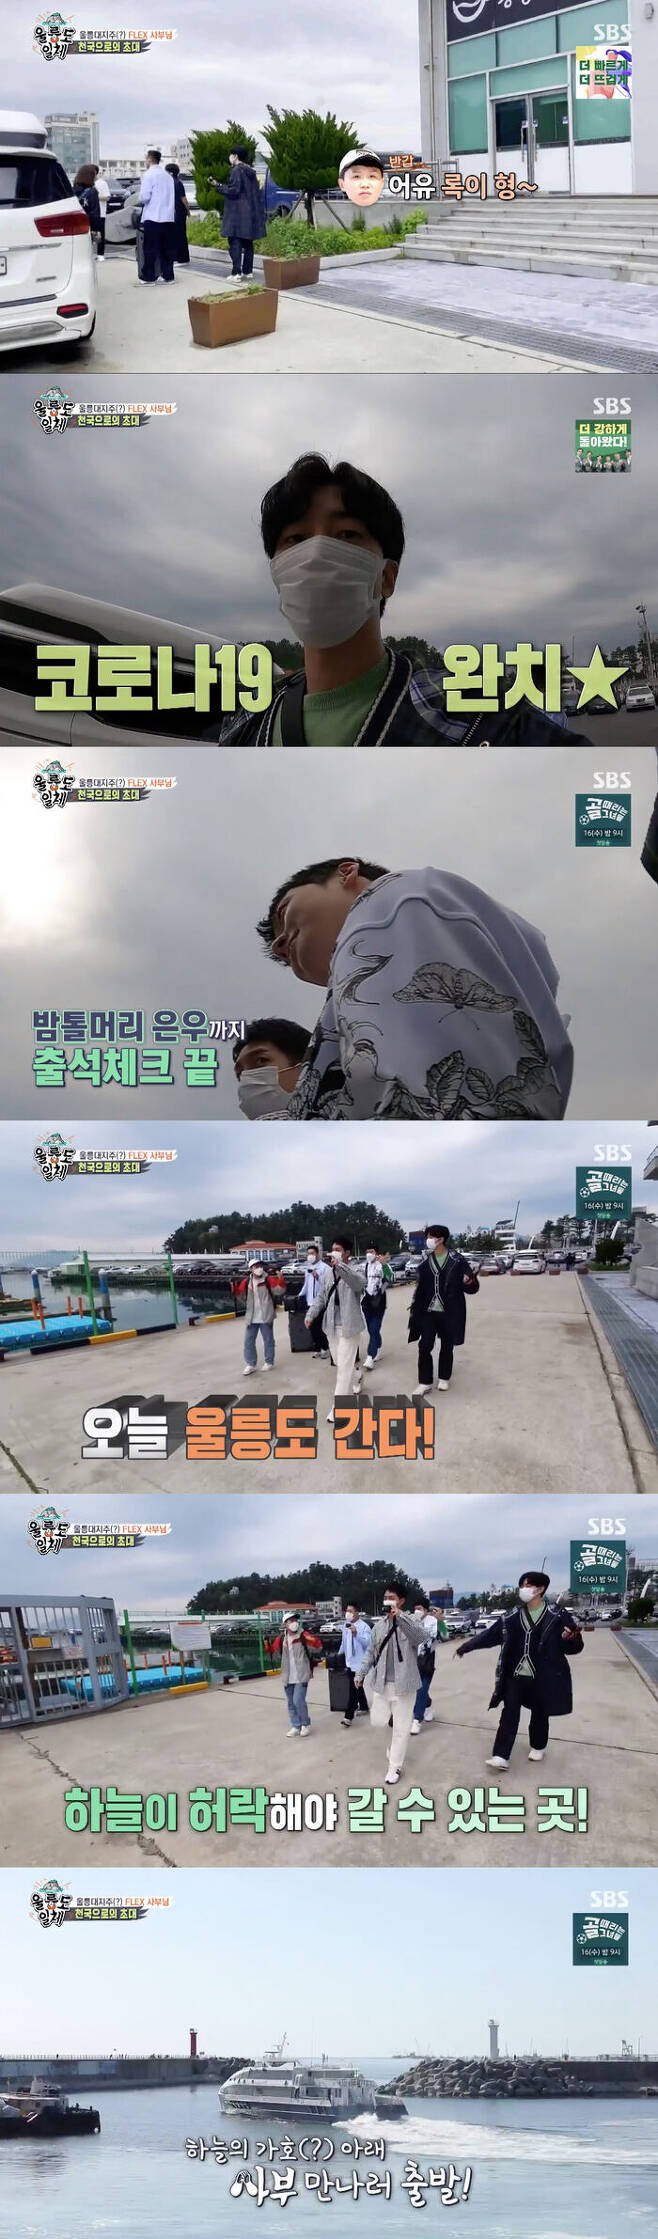 Shin Sung-rok appeared on Its been a long time after Corona 19 curing.On SBS All The Butlers broadcast on the 13th, five Perfect Fields were drawn together in Its been a long time.On this day, the members gathered at Gangneung Port at 8 am to go to Ulleungdo.And Yang Se-hyeong looked at Shin Sung-rok and said, Im glad that I got through it well.Shin Sung-rok, who was confirmed in Corona 19, was cured and reunited.Its been a long time, All The Butlers brothers five Perfect Field gathered to welcome.In addition, on this day, Cha Eun-woo revealed a new hairstyle with a night head.On the day of the show, the members headed to Ulleungdo, where Yang Se-hyeong said, I go to Ulleungdo.Ulleungdo said that heaven can only go. Kim Dong-hyun said, We think the sky has allowed us. 